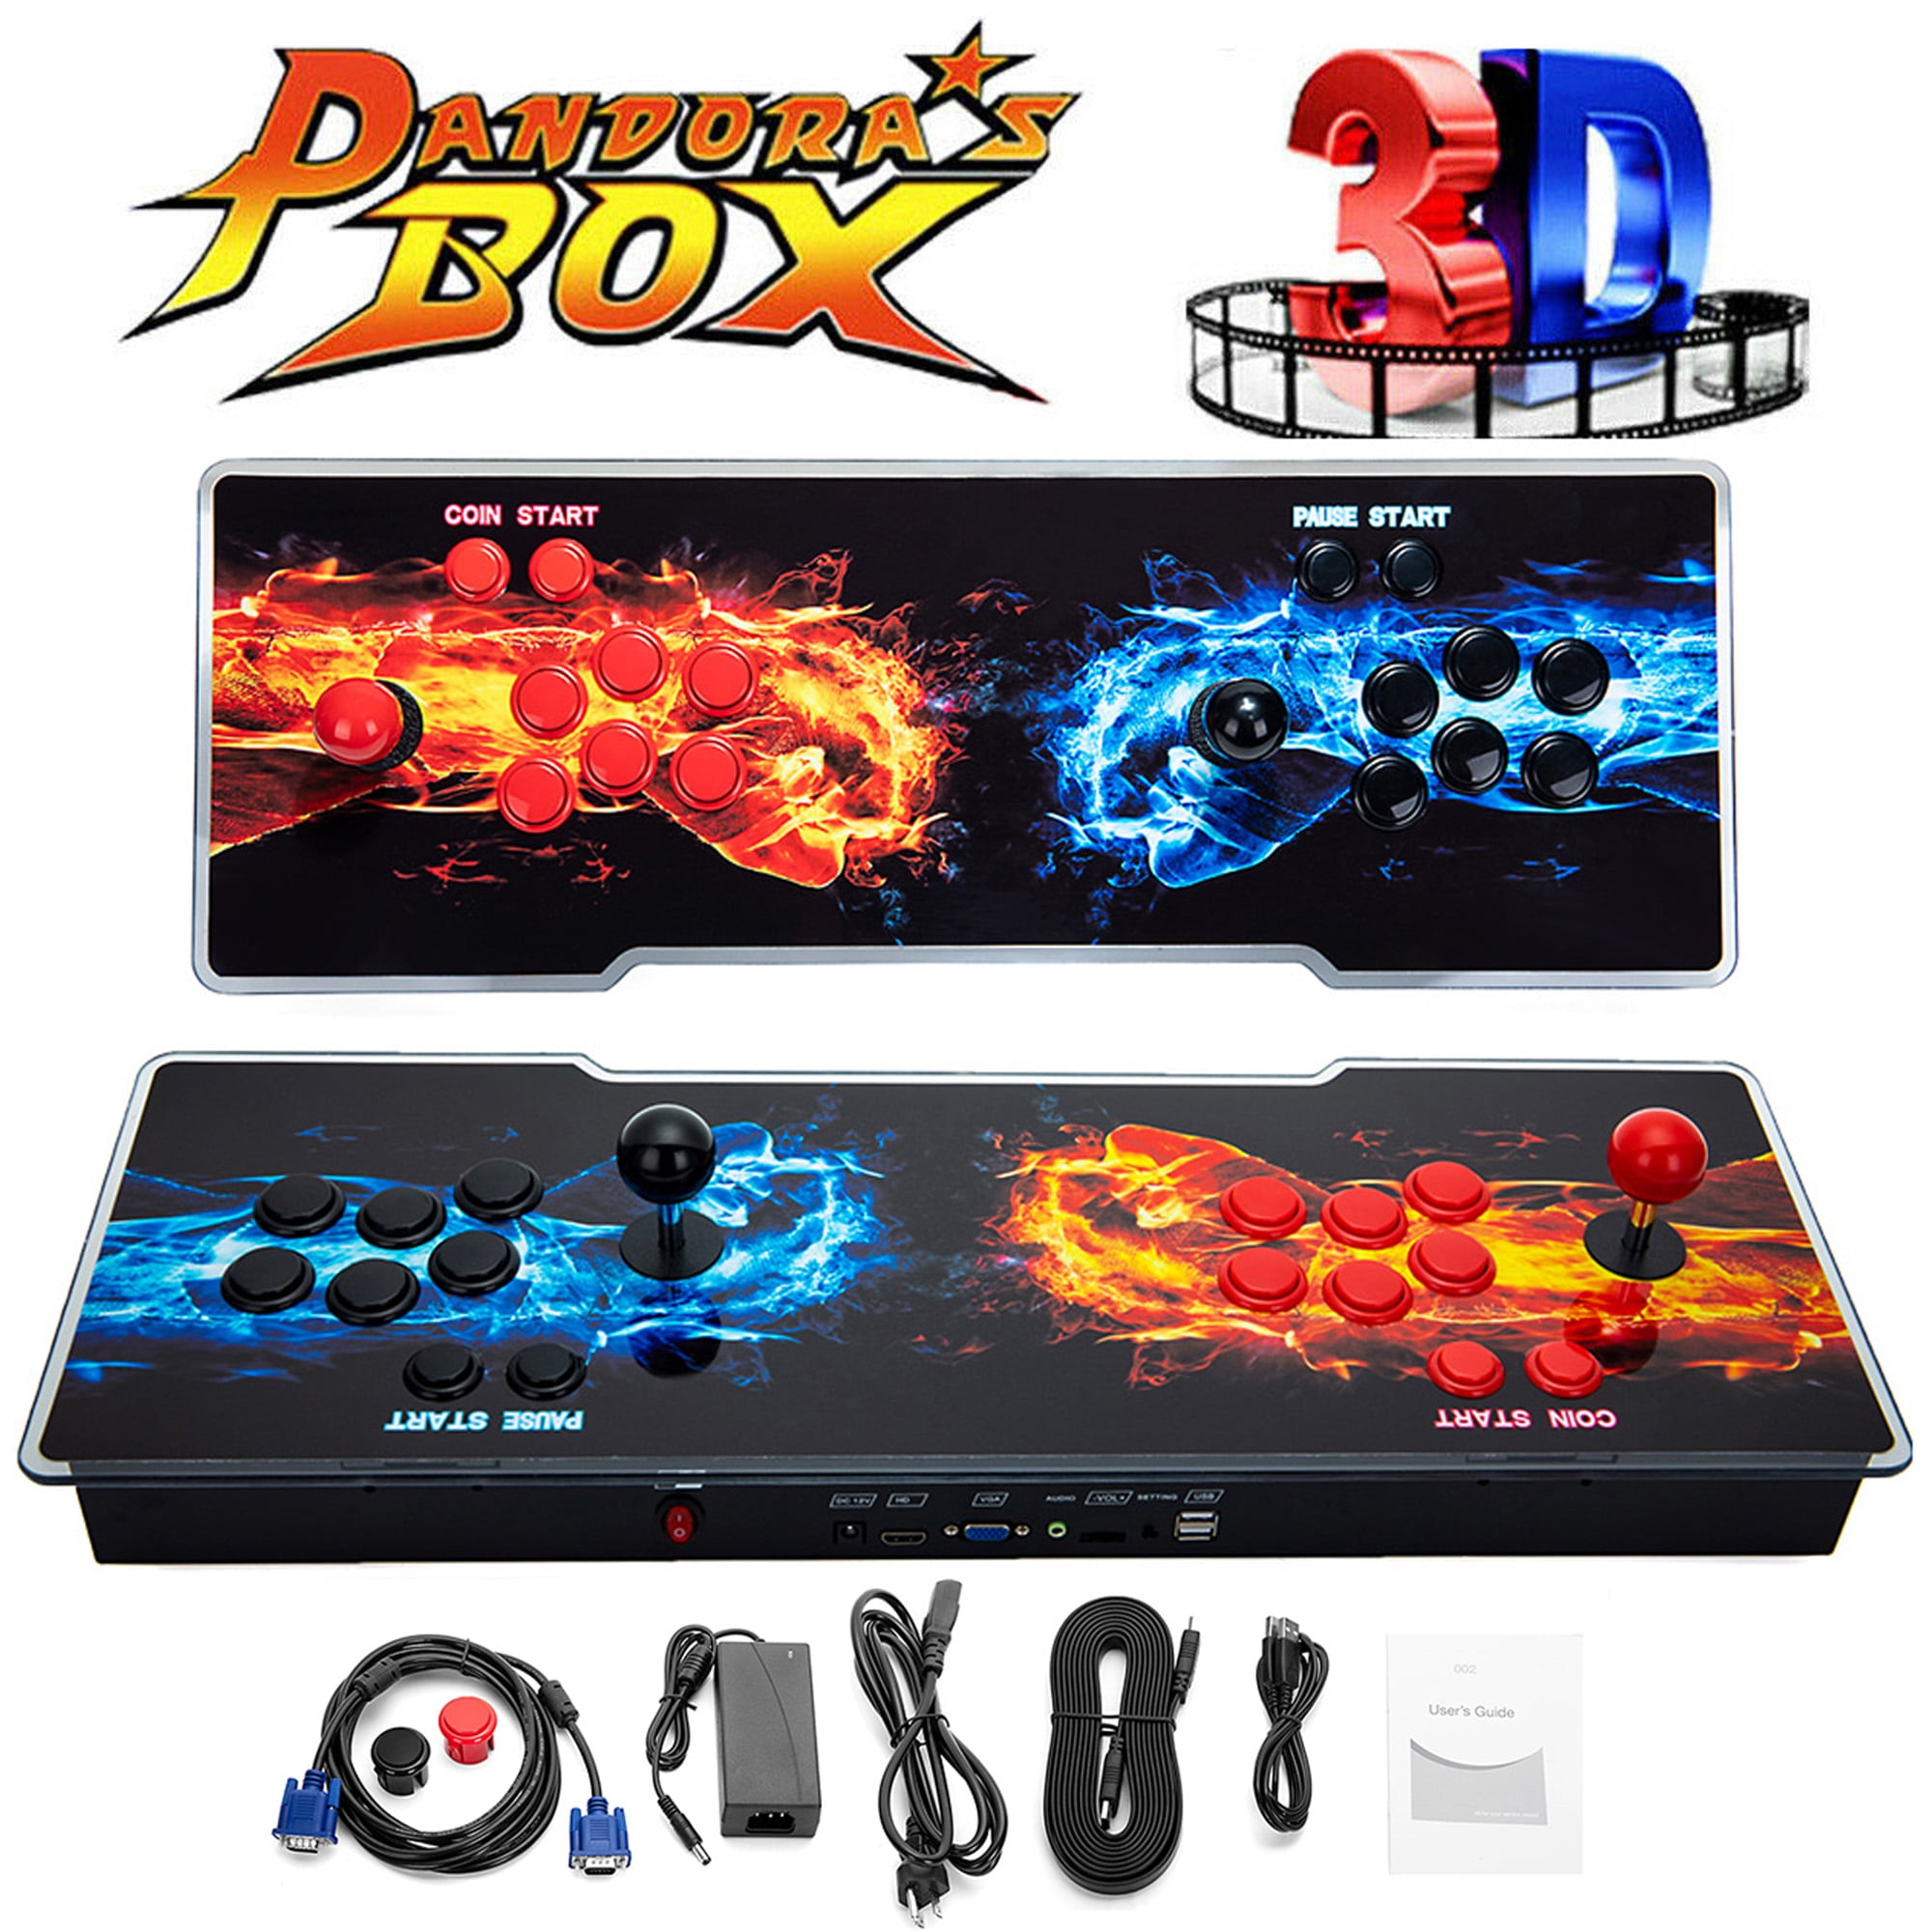 TV Laptop Retro Video Arcade Games Console Built-in 3399 Games Support 3D Games Compatible with HDMI and VGA for PC JOHNHARO Pandoras Box Arcade